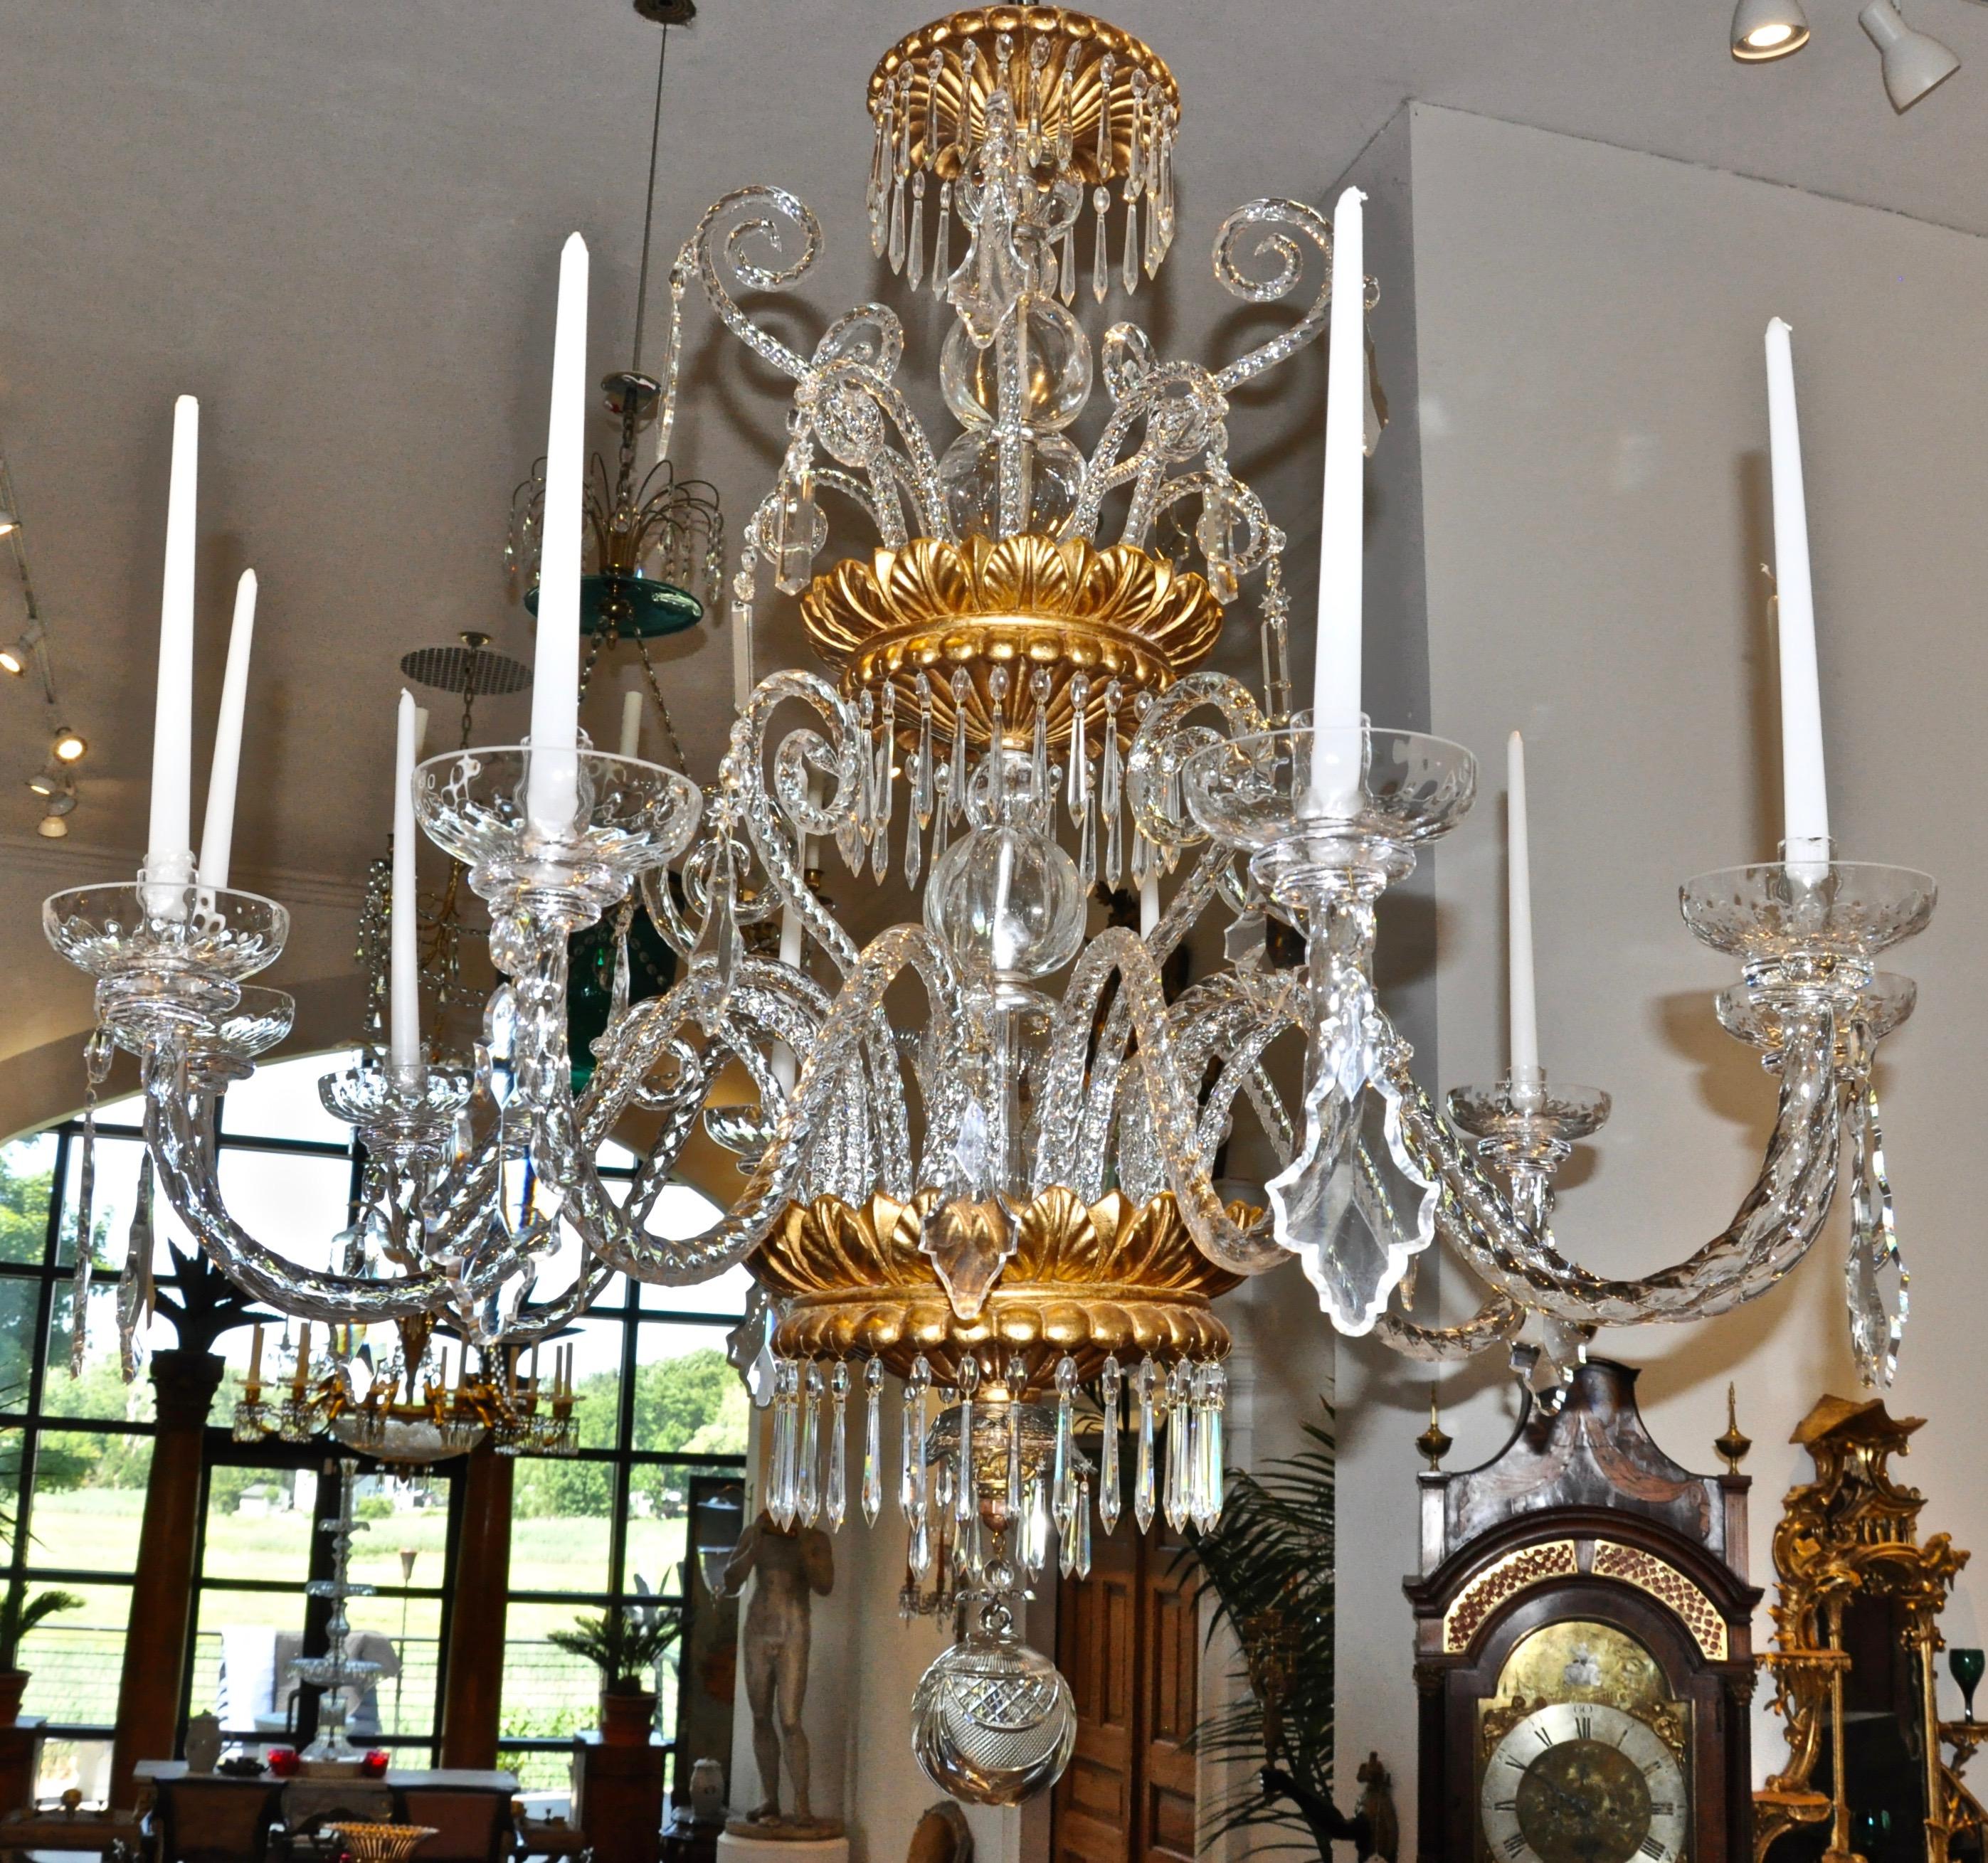 Midcentury Italian handblown neoclassical chandelier 

Italian chandelier of probable Murano origin. Ten lights issuing from foliate carved and gilt wooden bowls. Whimsical design. Stately yet engaging presence. Excellent condition. Now candles